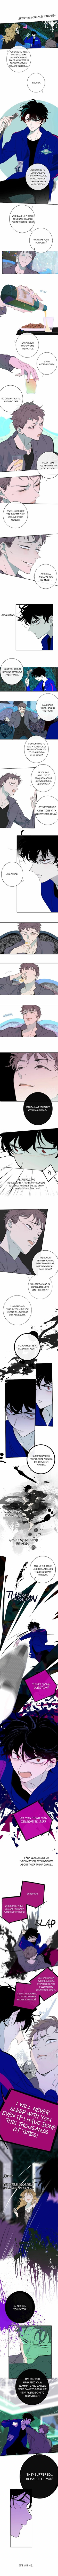 We Are Not Friends - Page 2